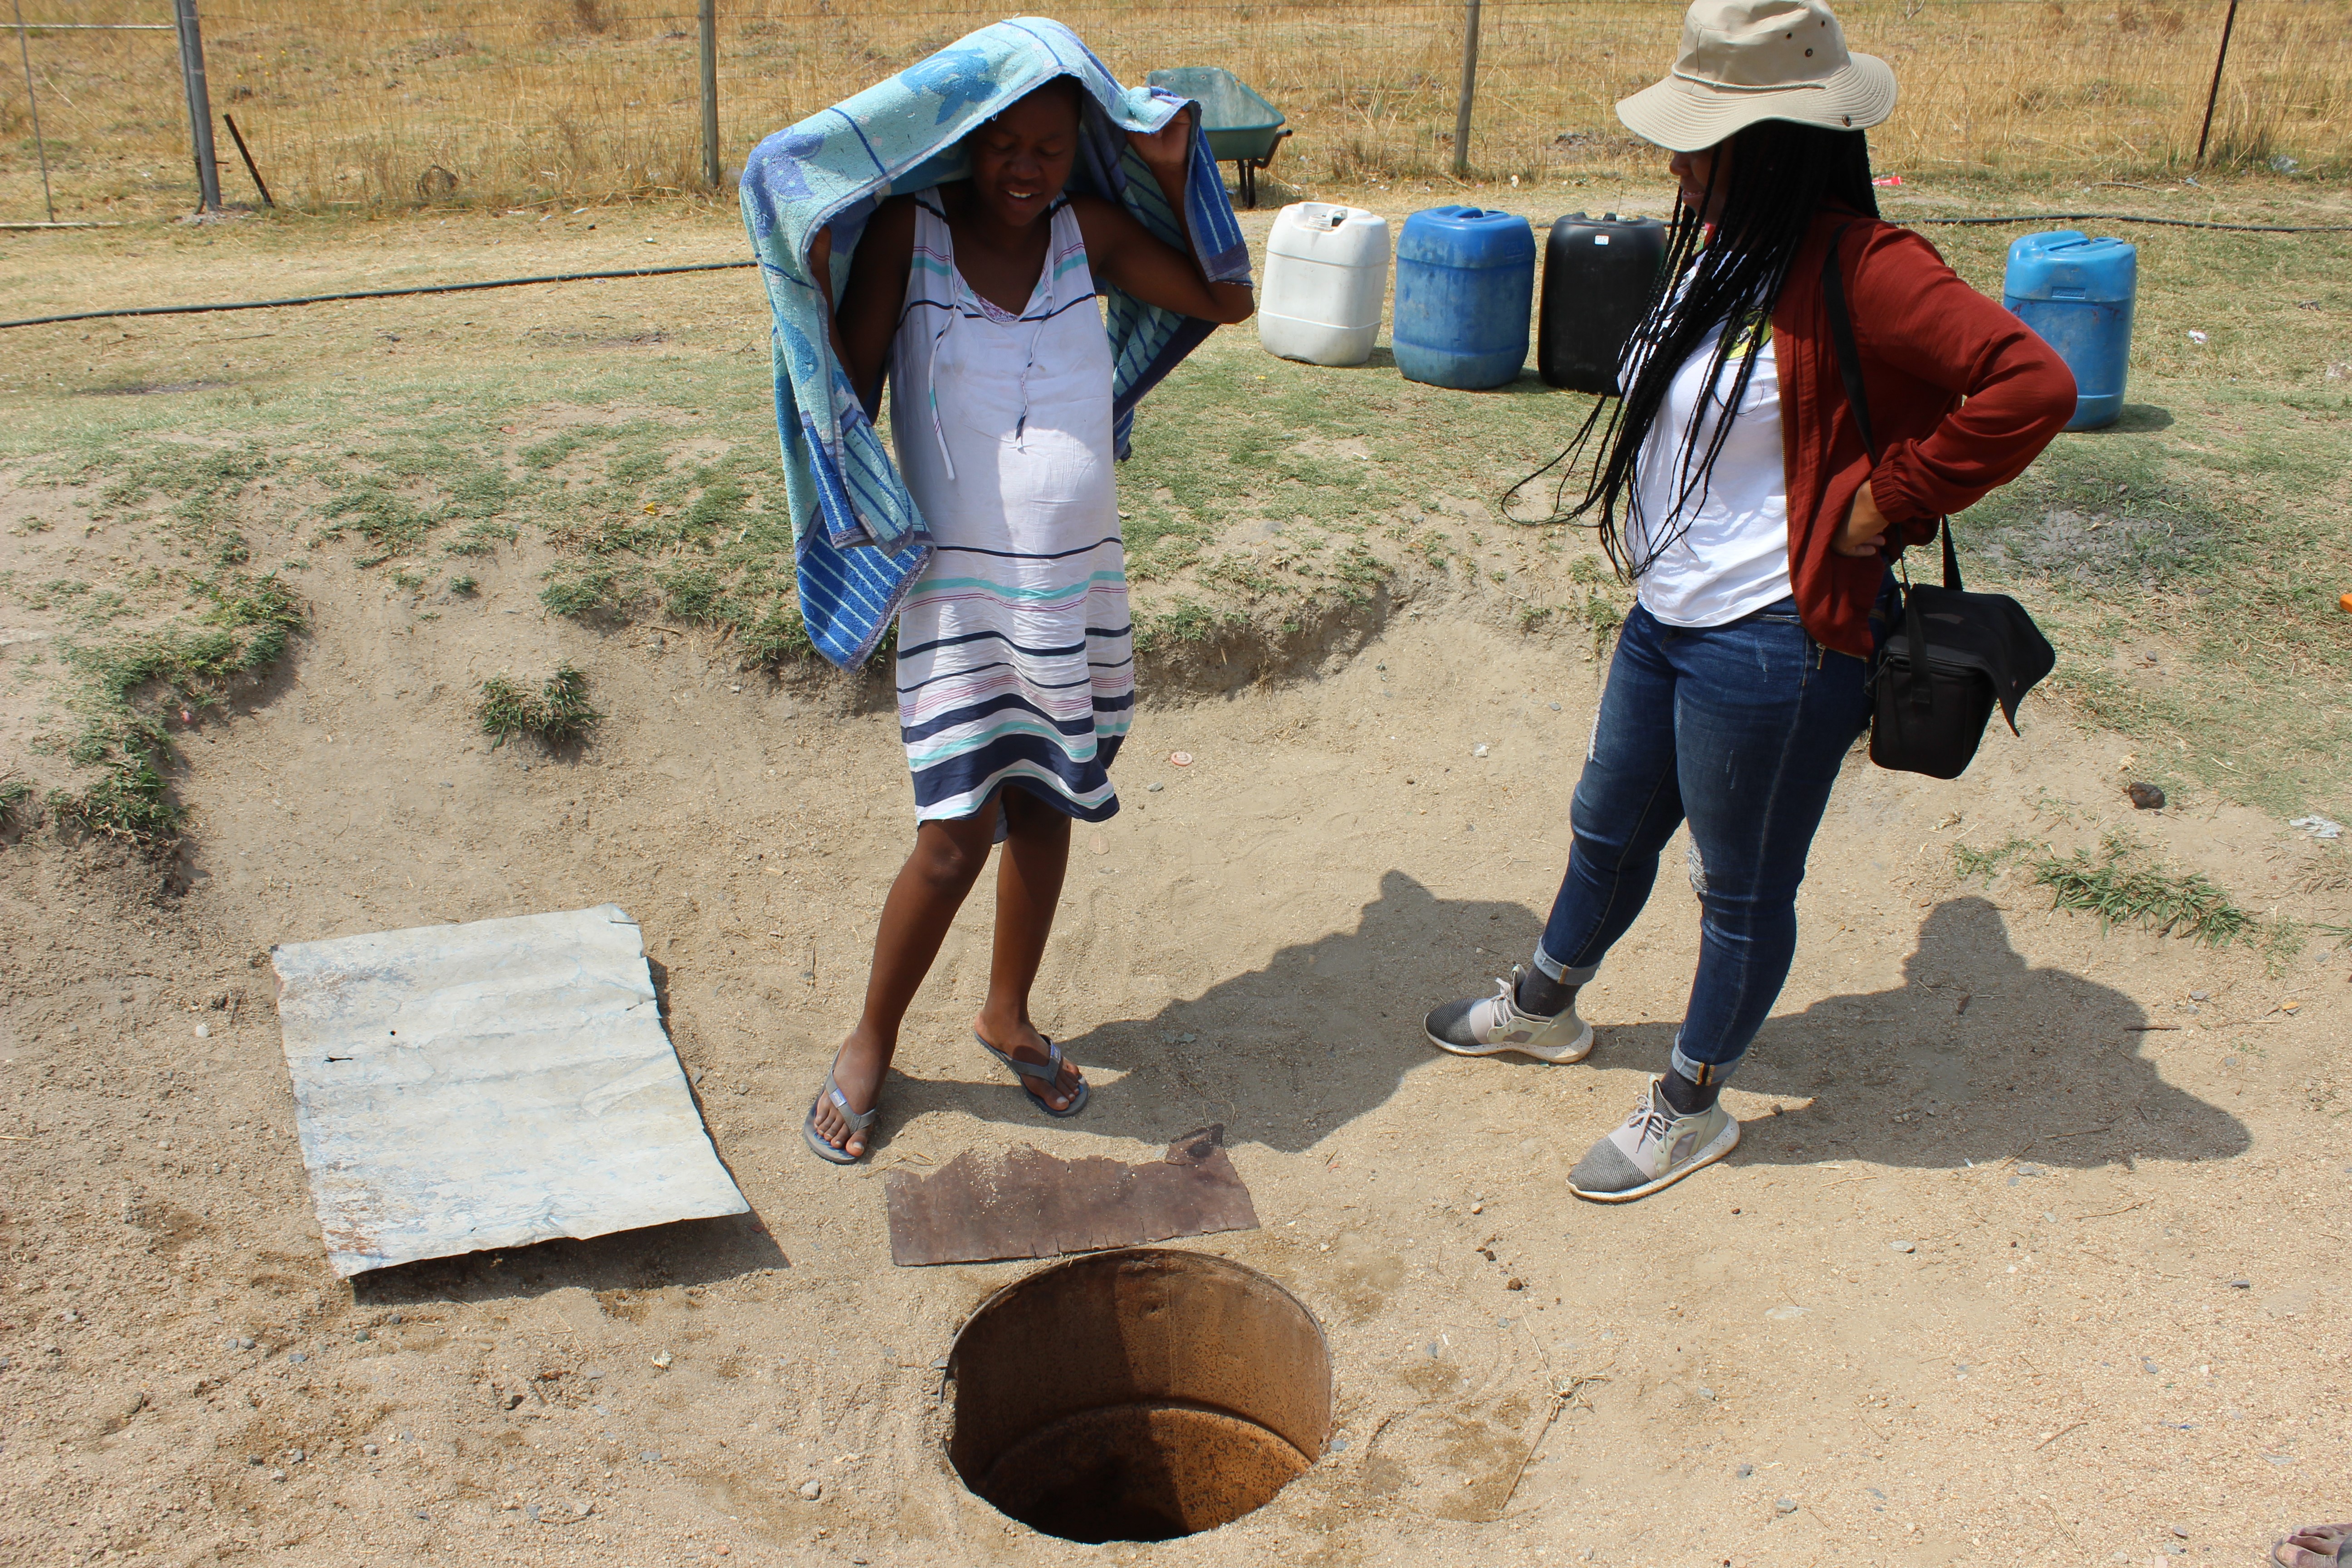 Mrs Lesedi shows AWARD the well that she collects water from on a daily basis (Photo: AWARD)